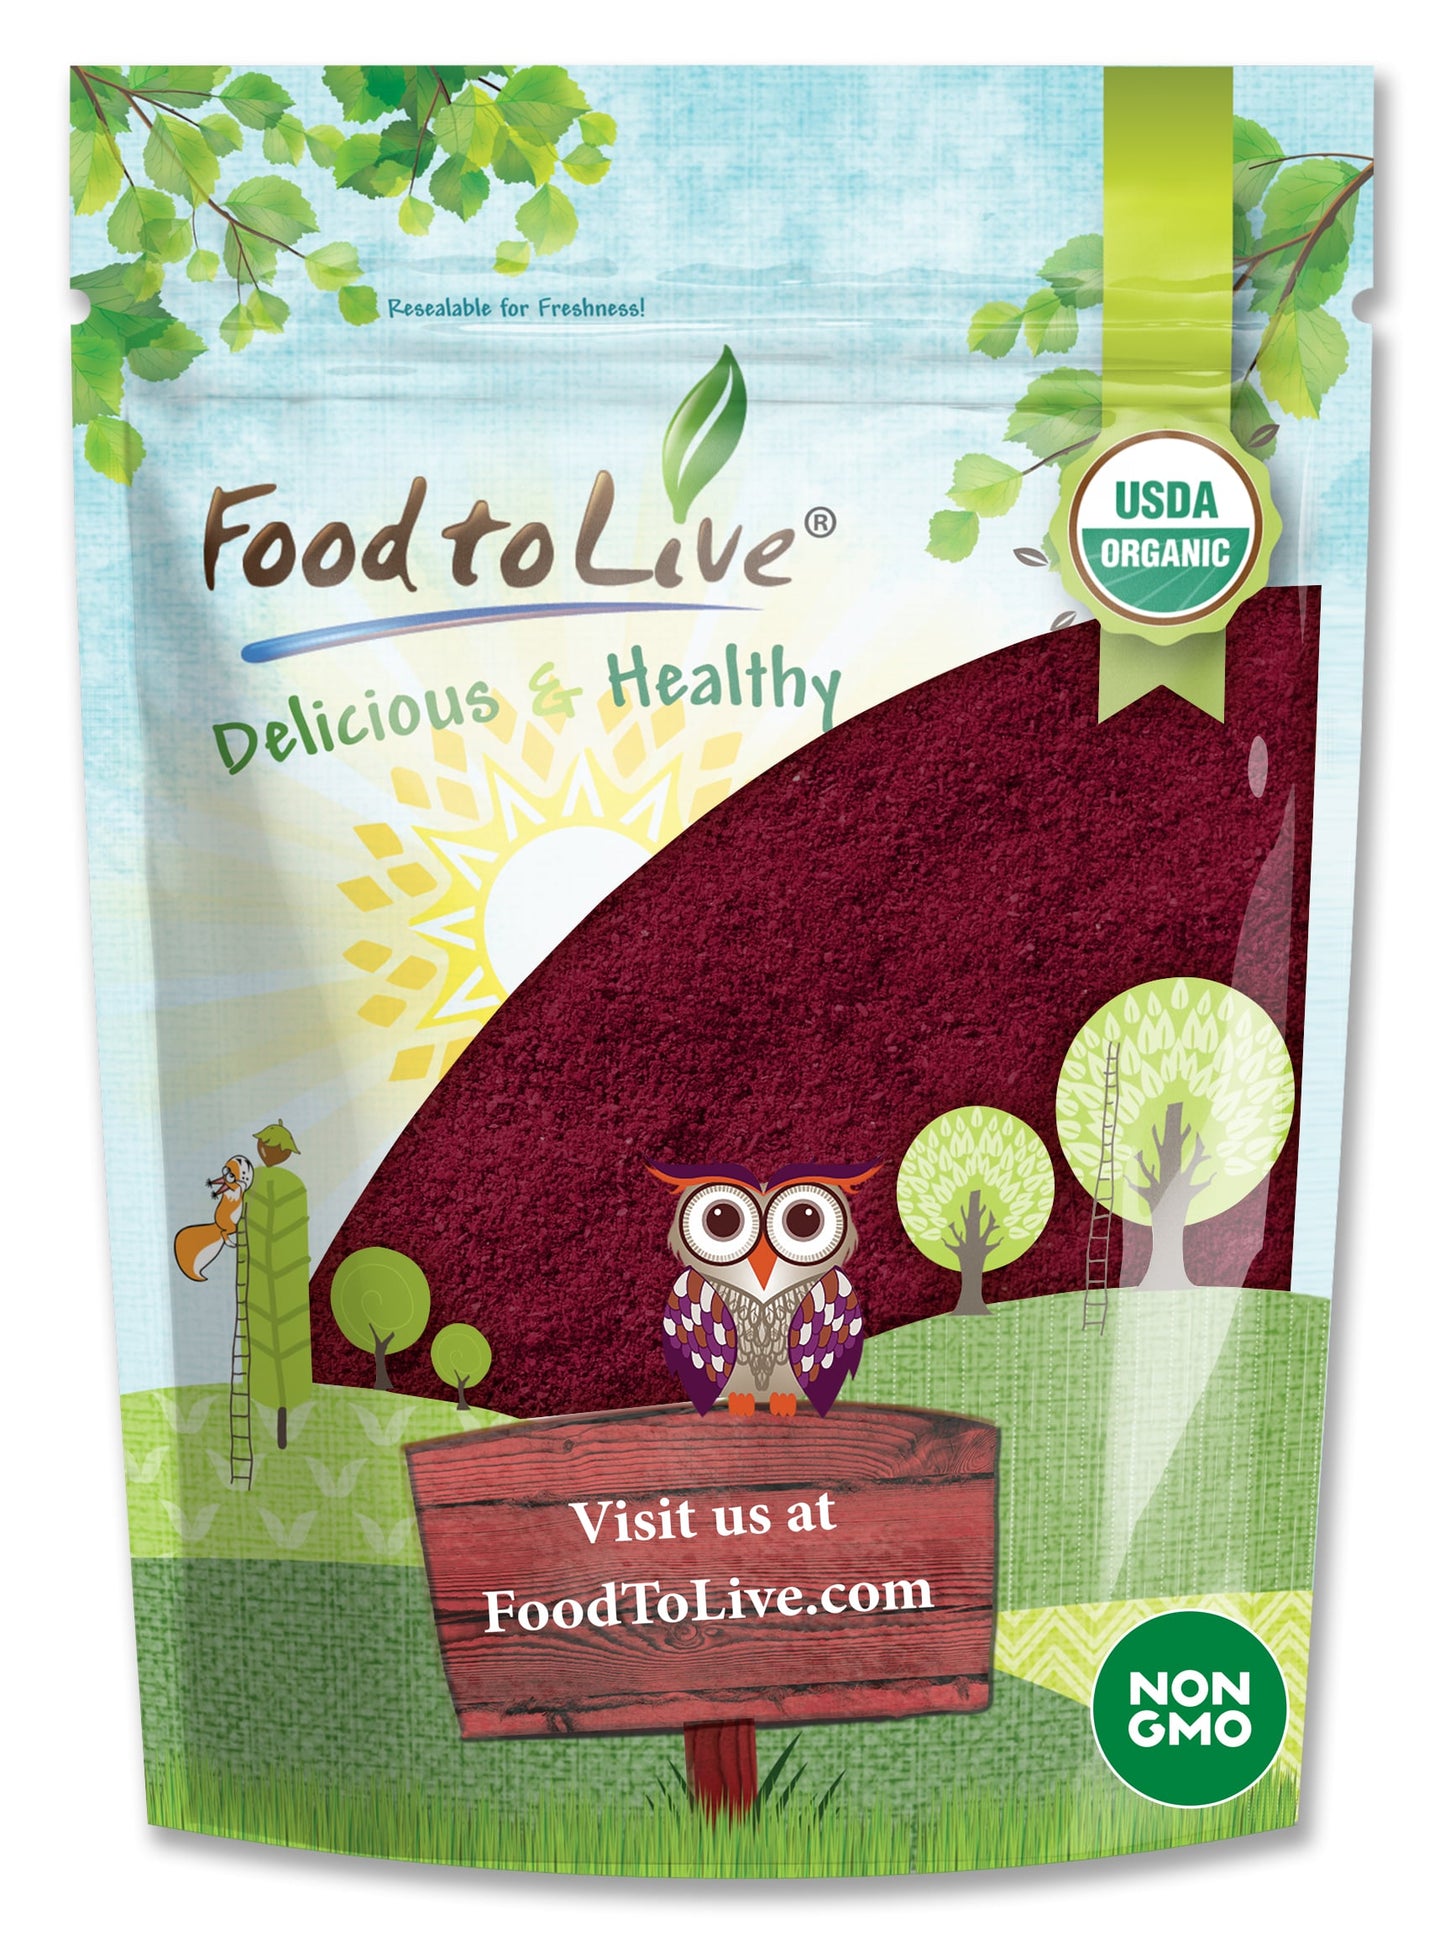 Organic Beet Root Juice Powder – Non-GMO, Raw, Keto, Vegan, Bulk, Contains Maltodextrin. Nitric Oxide Booster. Easy to Use. Rich in Antioxidants, Fiber. Perfect for Smoothies, Soup, Hummus